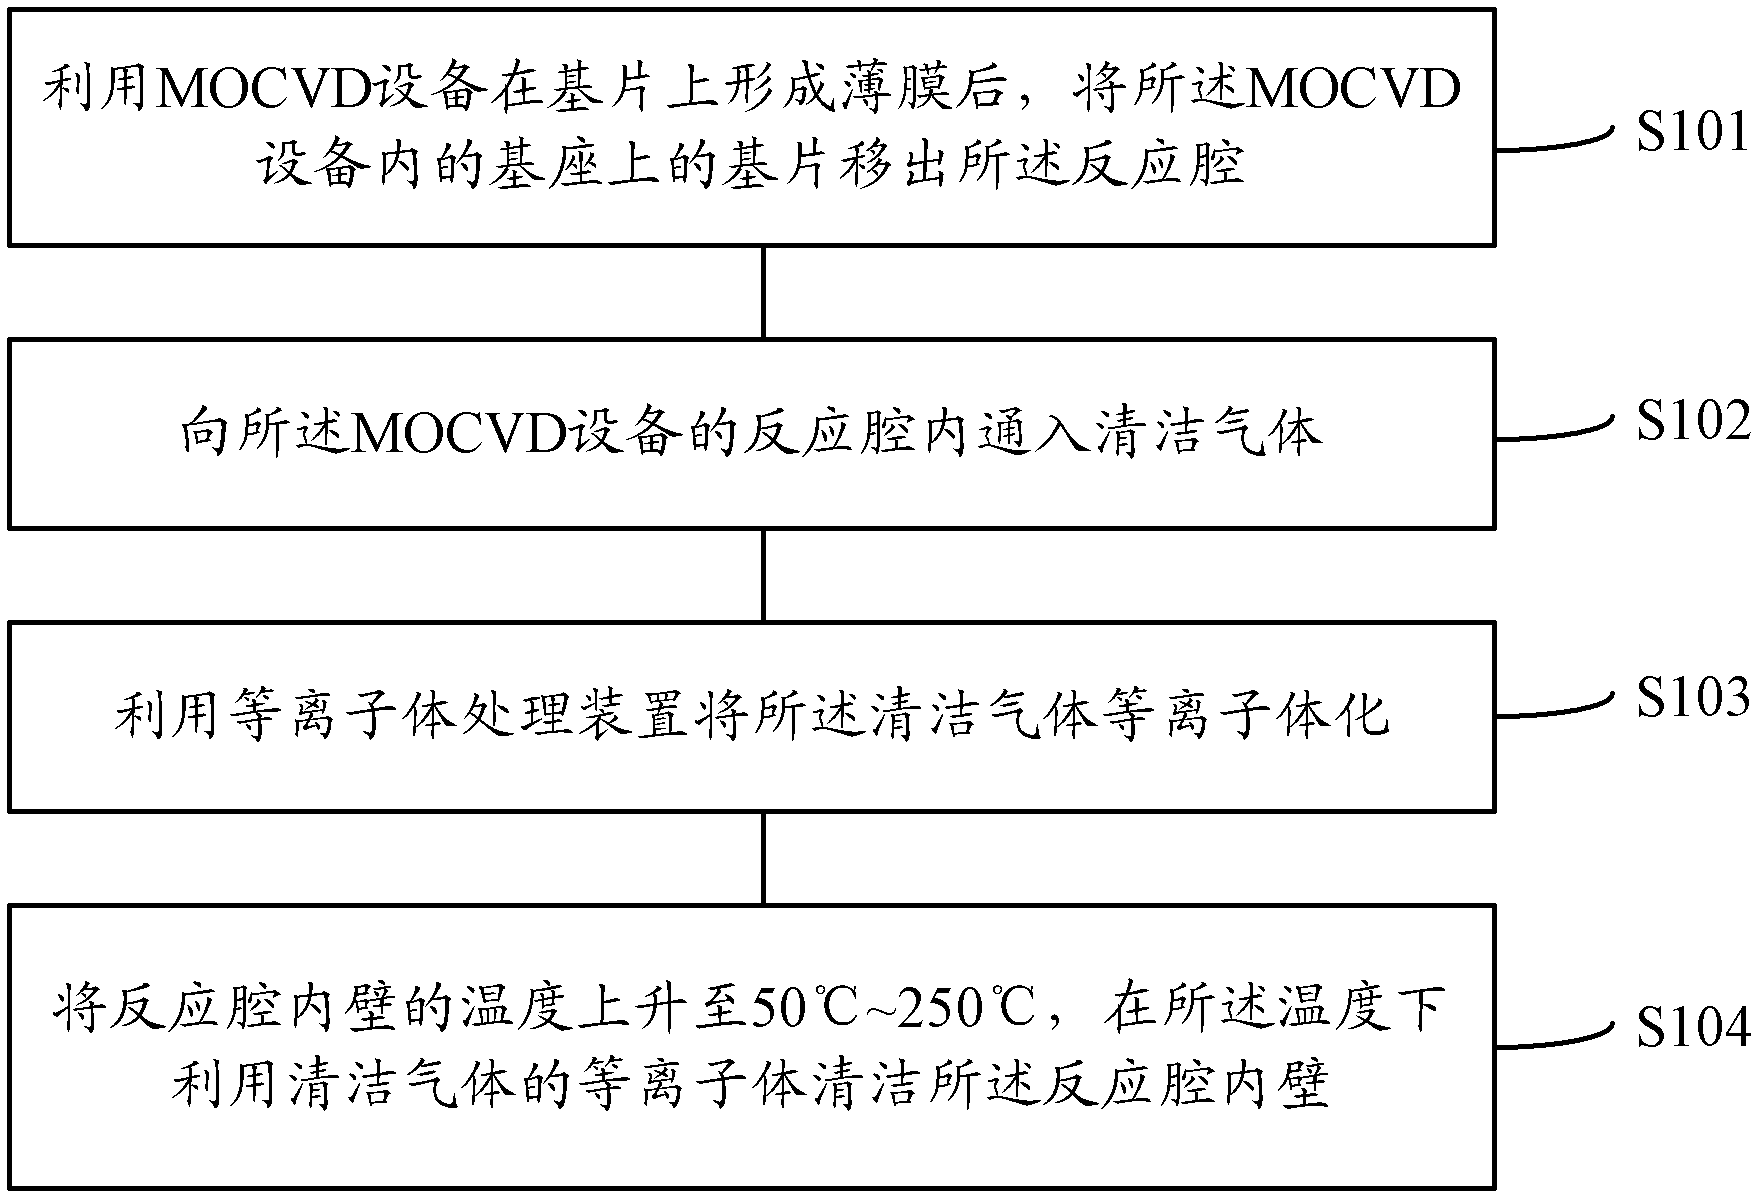 Cleaning method for MOCVD equipment